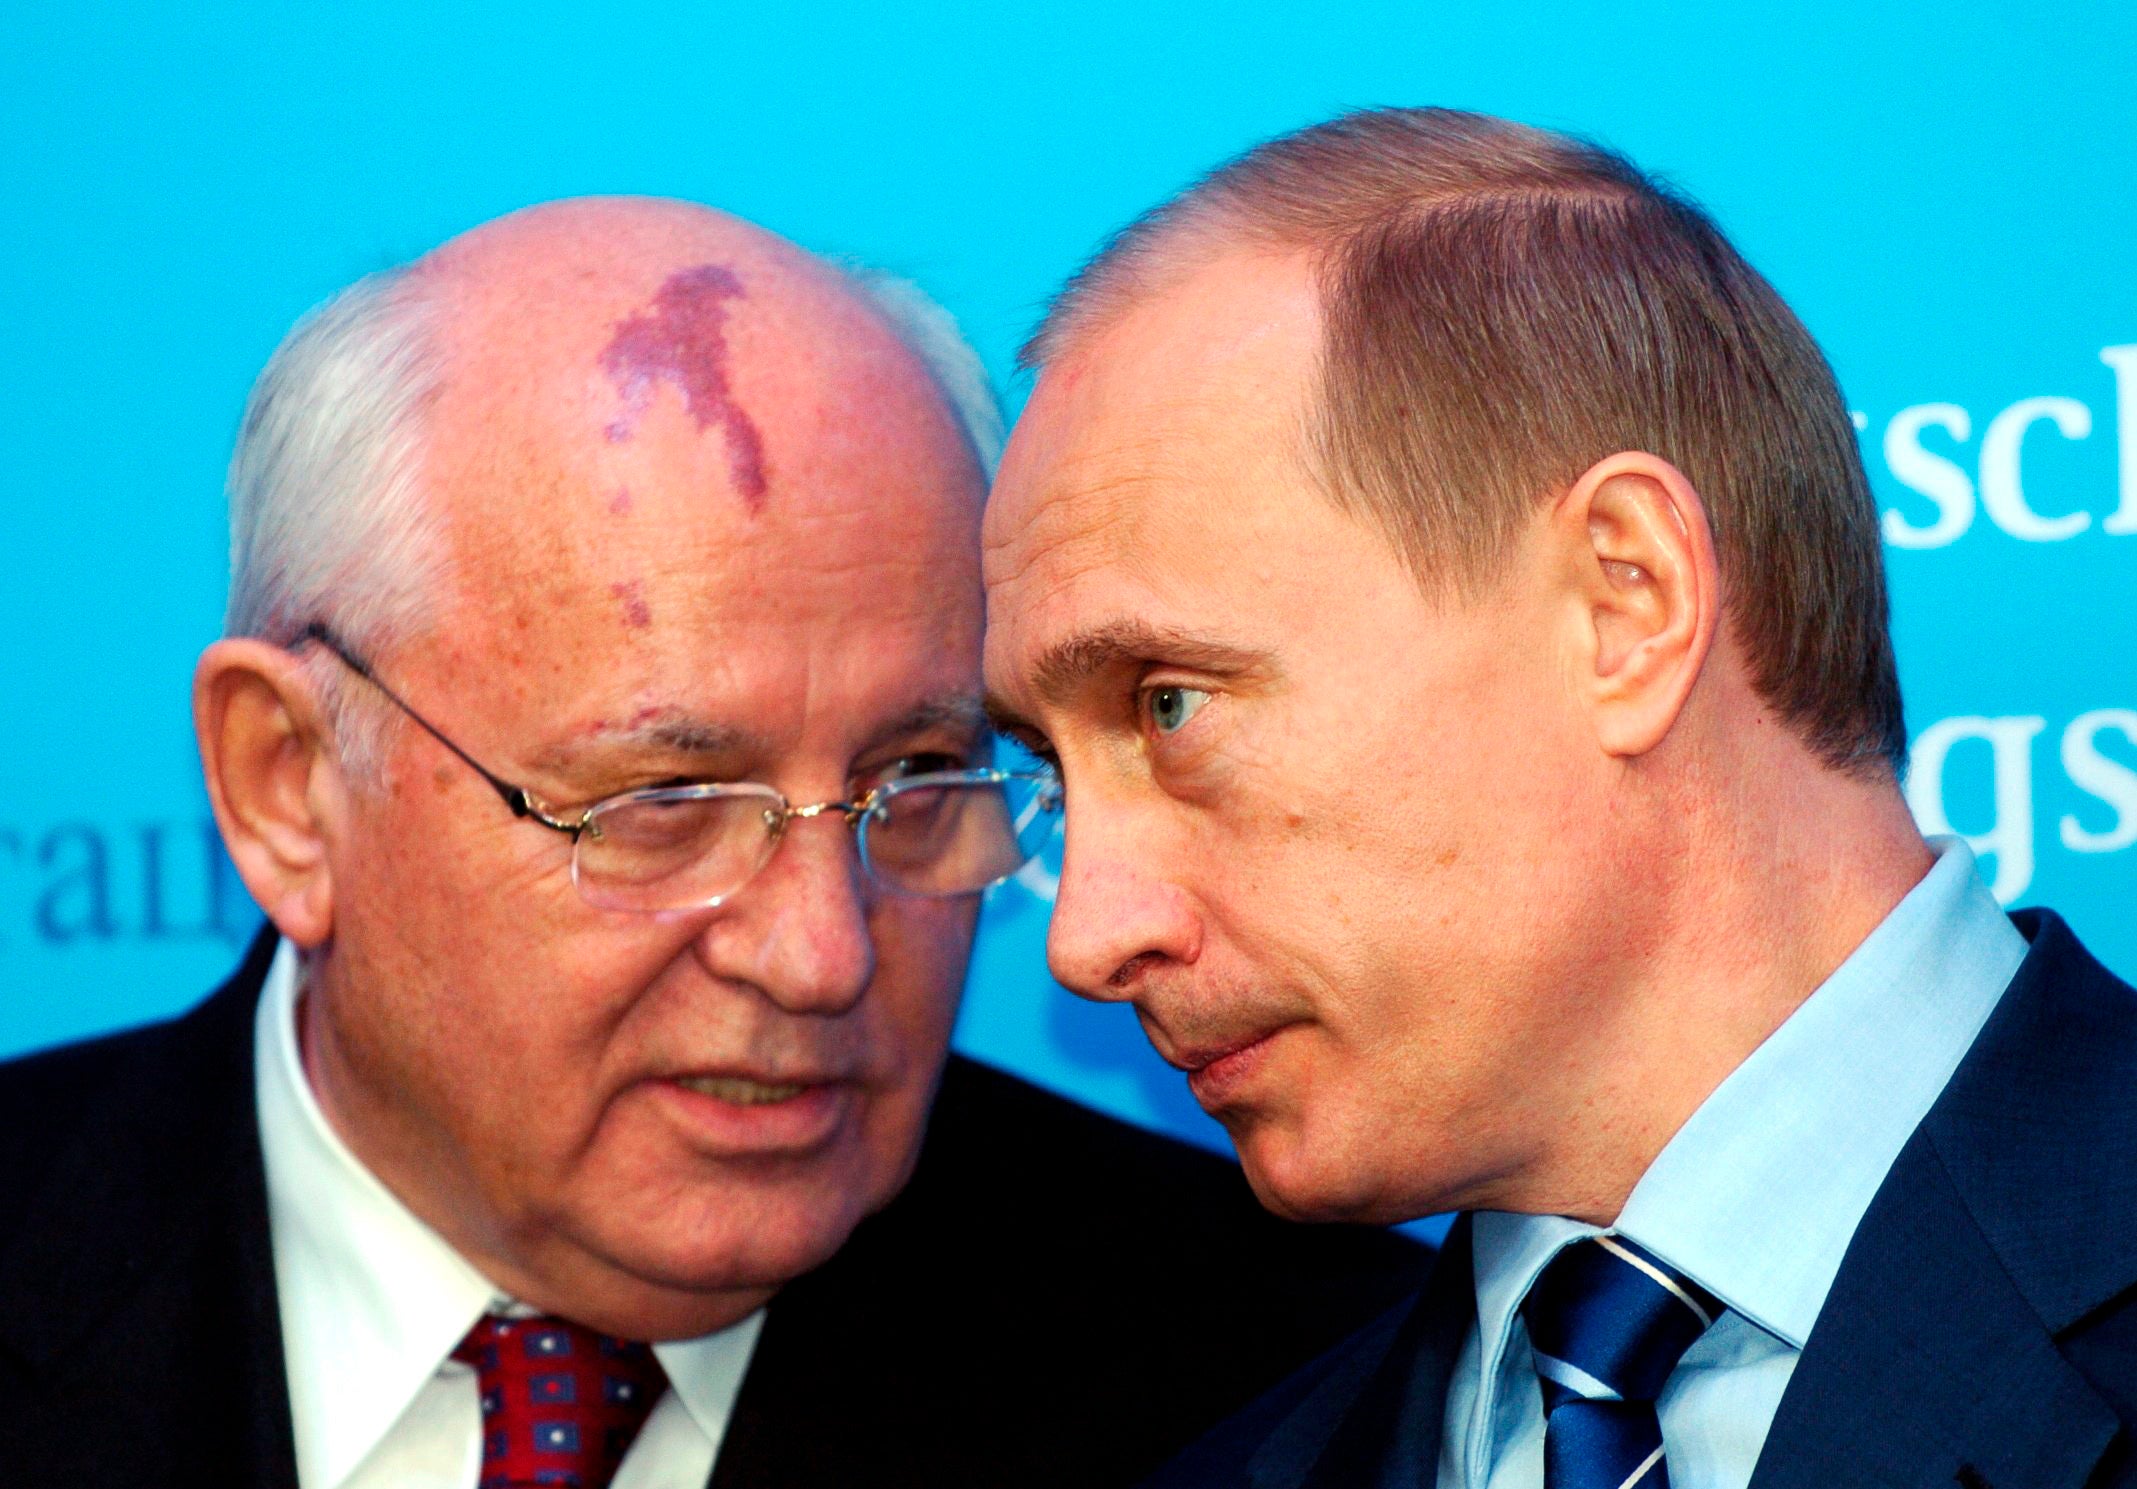 Russia's President Vladimir Putin, right, talks with former Soviet President Mikhail Gorbachev at the start of a news conference at the Castle of Gottorf in Schleswig, northern Germany, Tuesday, Dec. 21, 2004